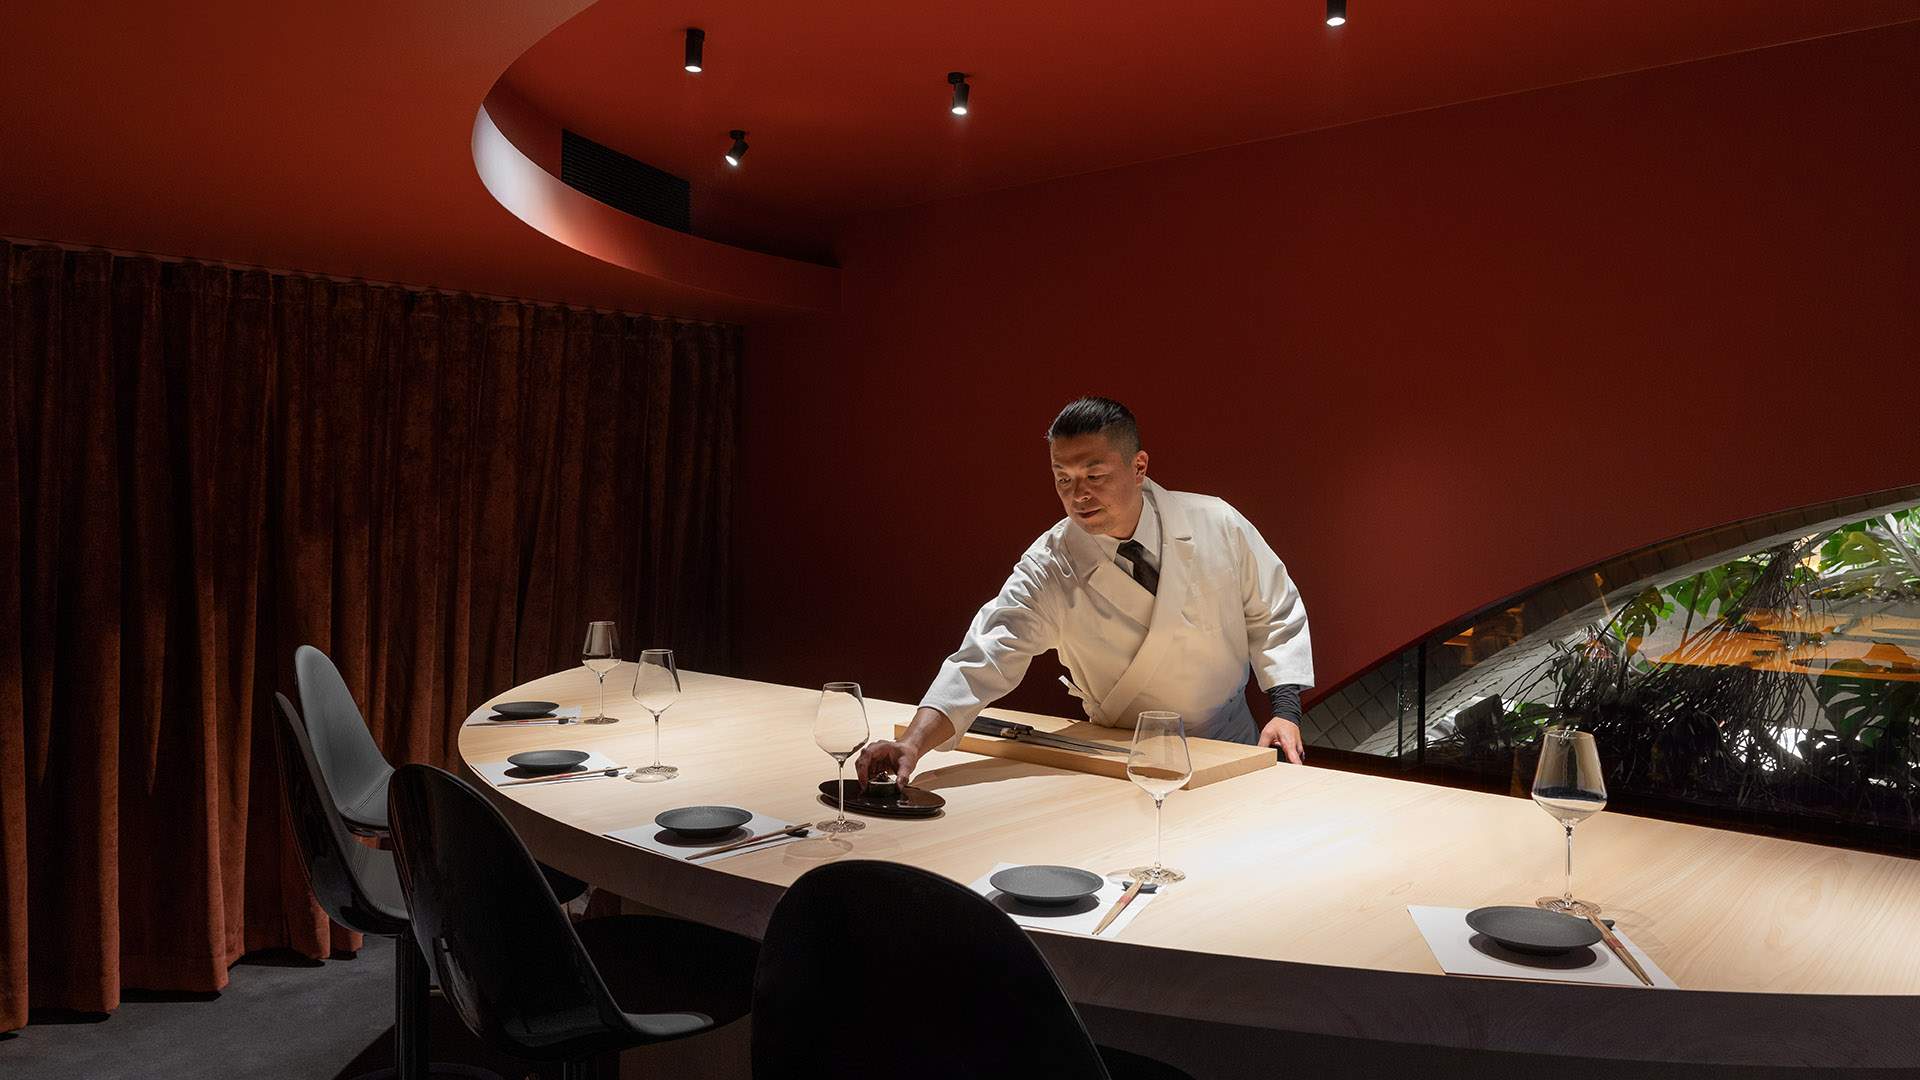 Sushi Room is James Street’s Luxe New Japanese Fine-Dining Experience